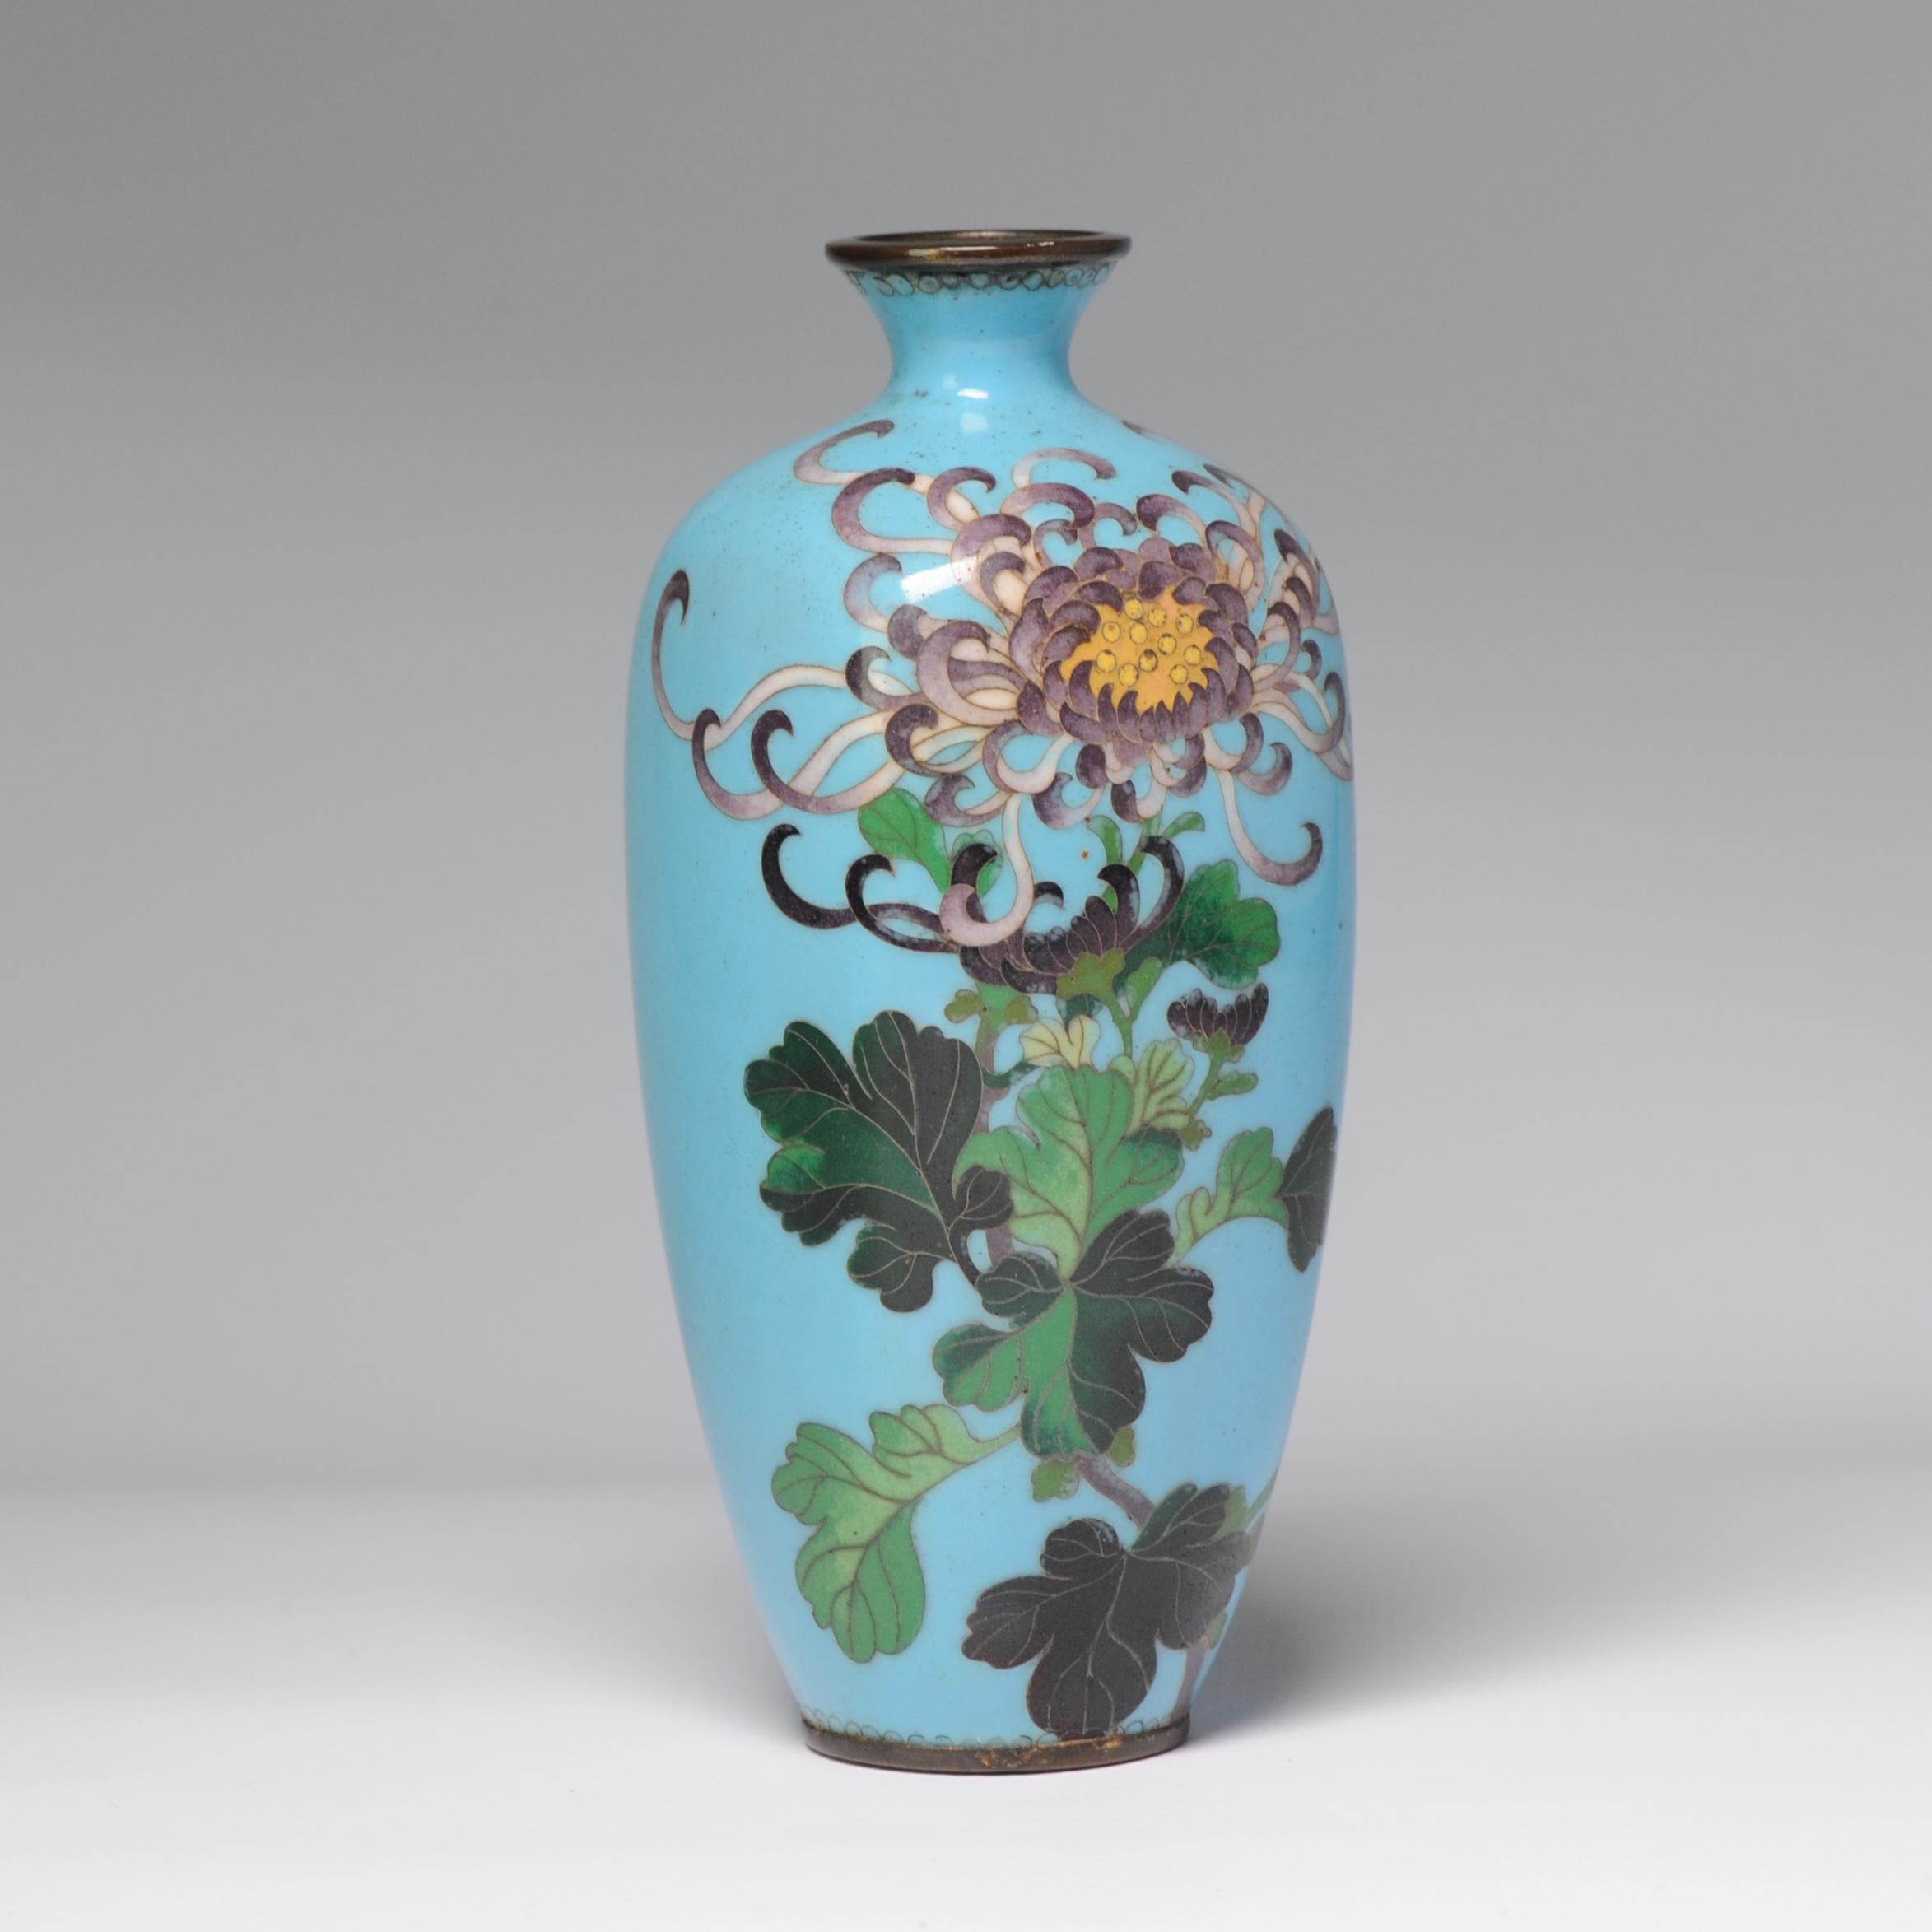 Absolute top Quality vase with superb decoration of flowers

Cloisonné is a way of enamelling an object, (typically made of copper) whereby fine wires are used to delineate the decorative areas (cloisons in French, hence cloisonné) into which